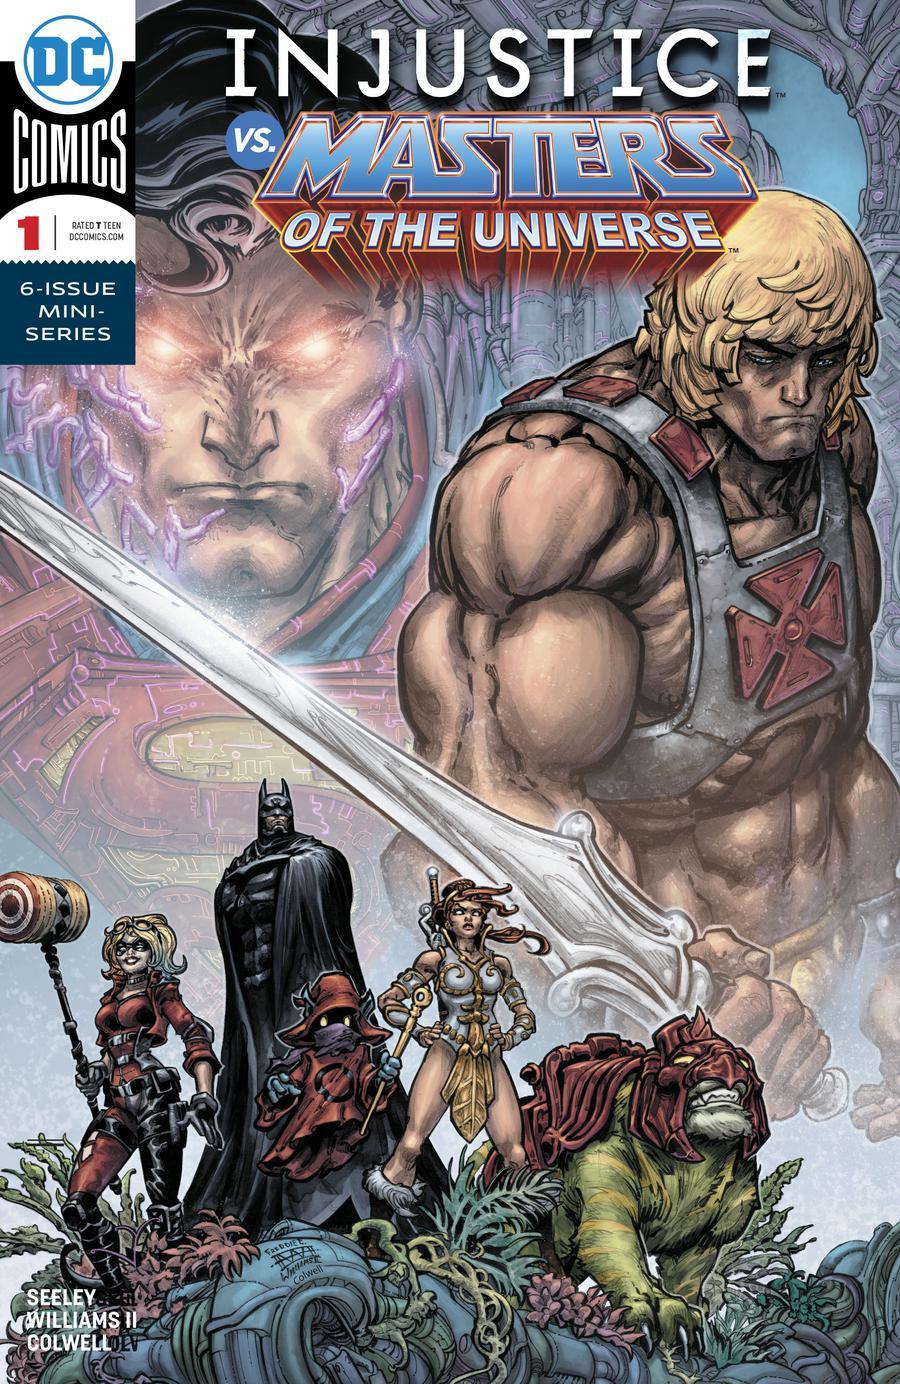 Injustice vs The Masters Of The Universe Vol. 1 #1